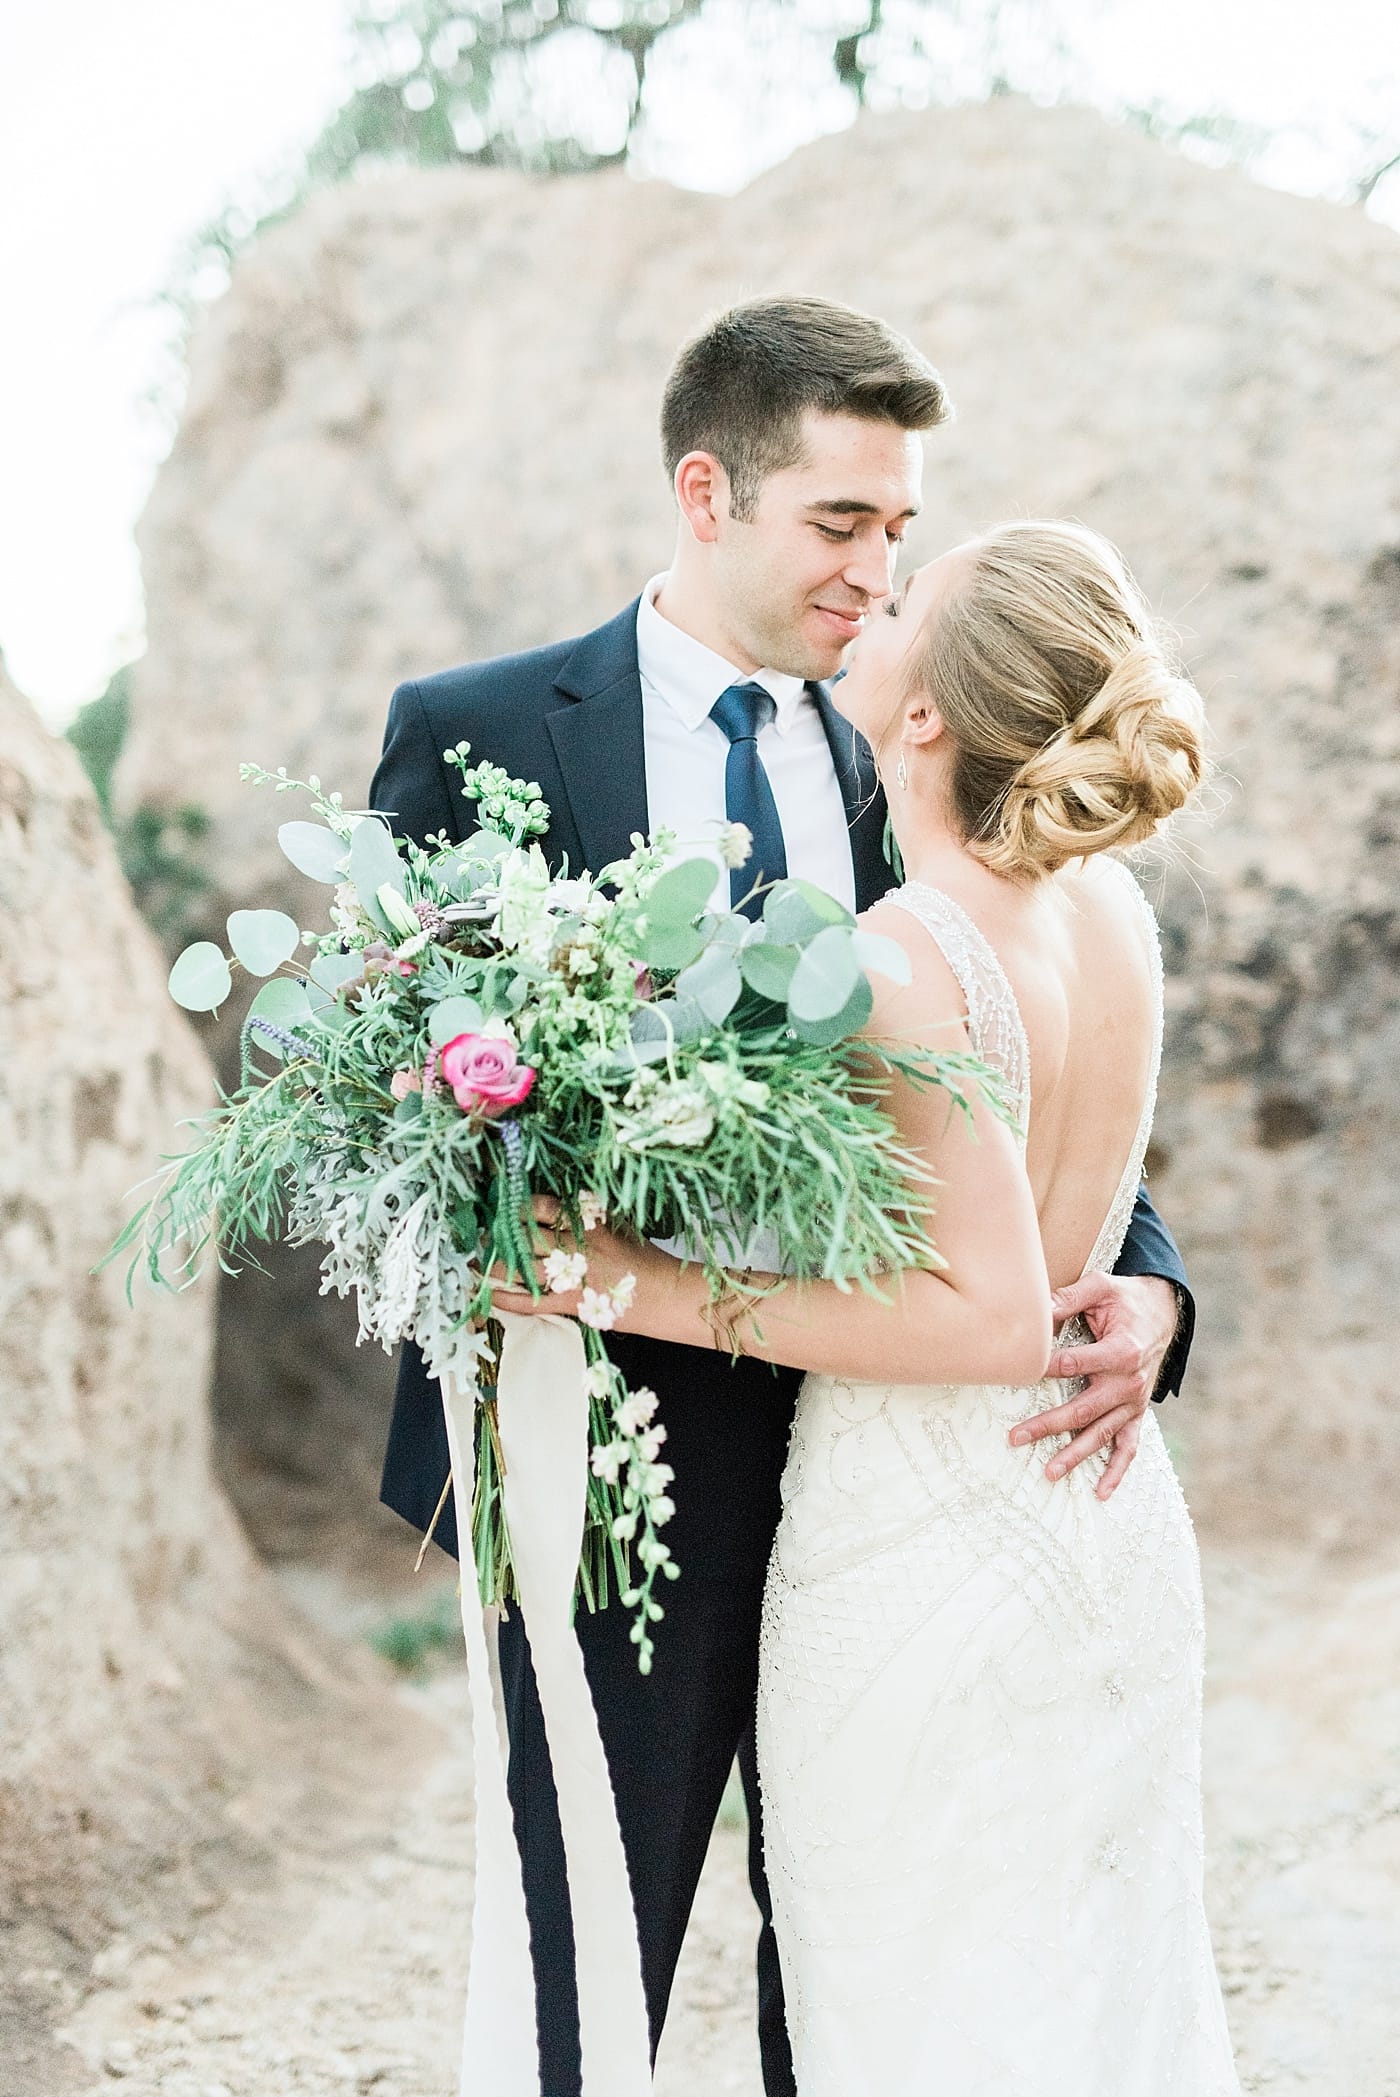 City of Rocks Styled Shoot Featuring Maui - Maui wedding dress by Sottero and Midgley